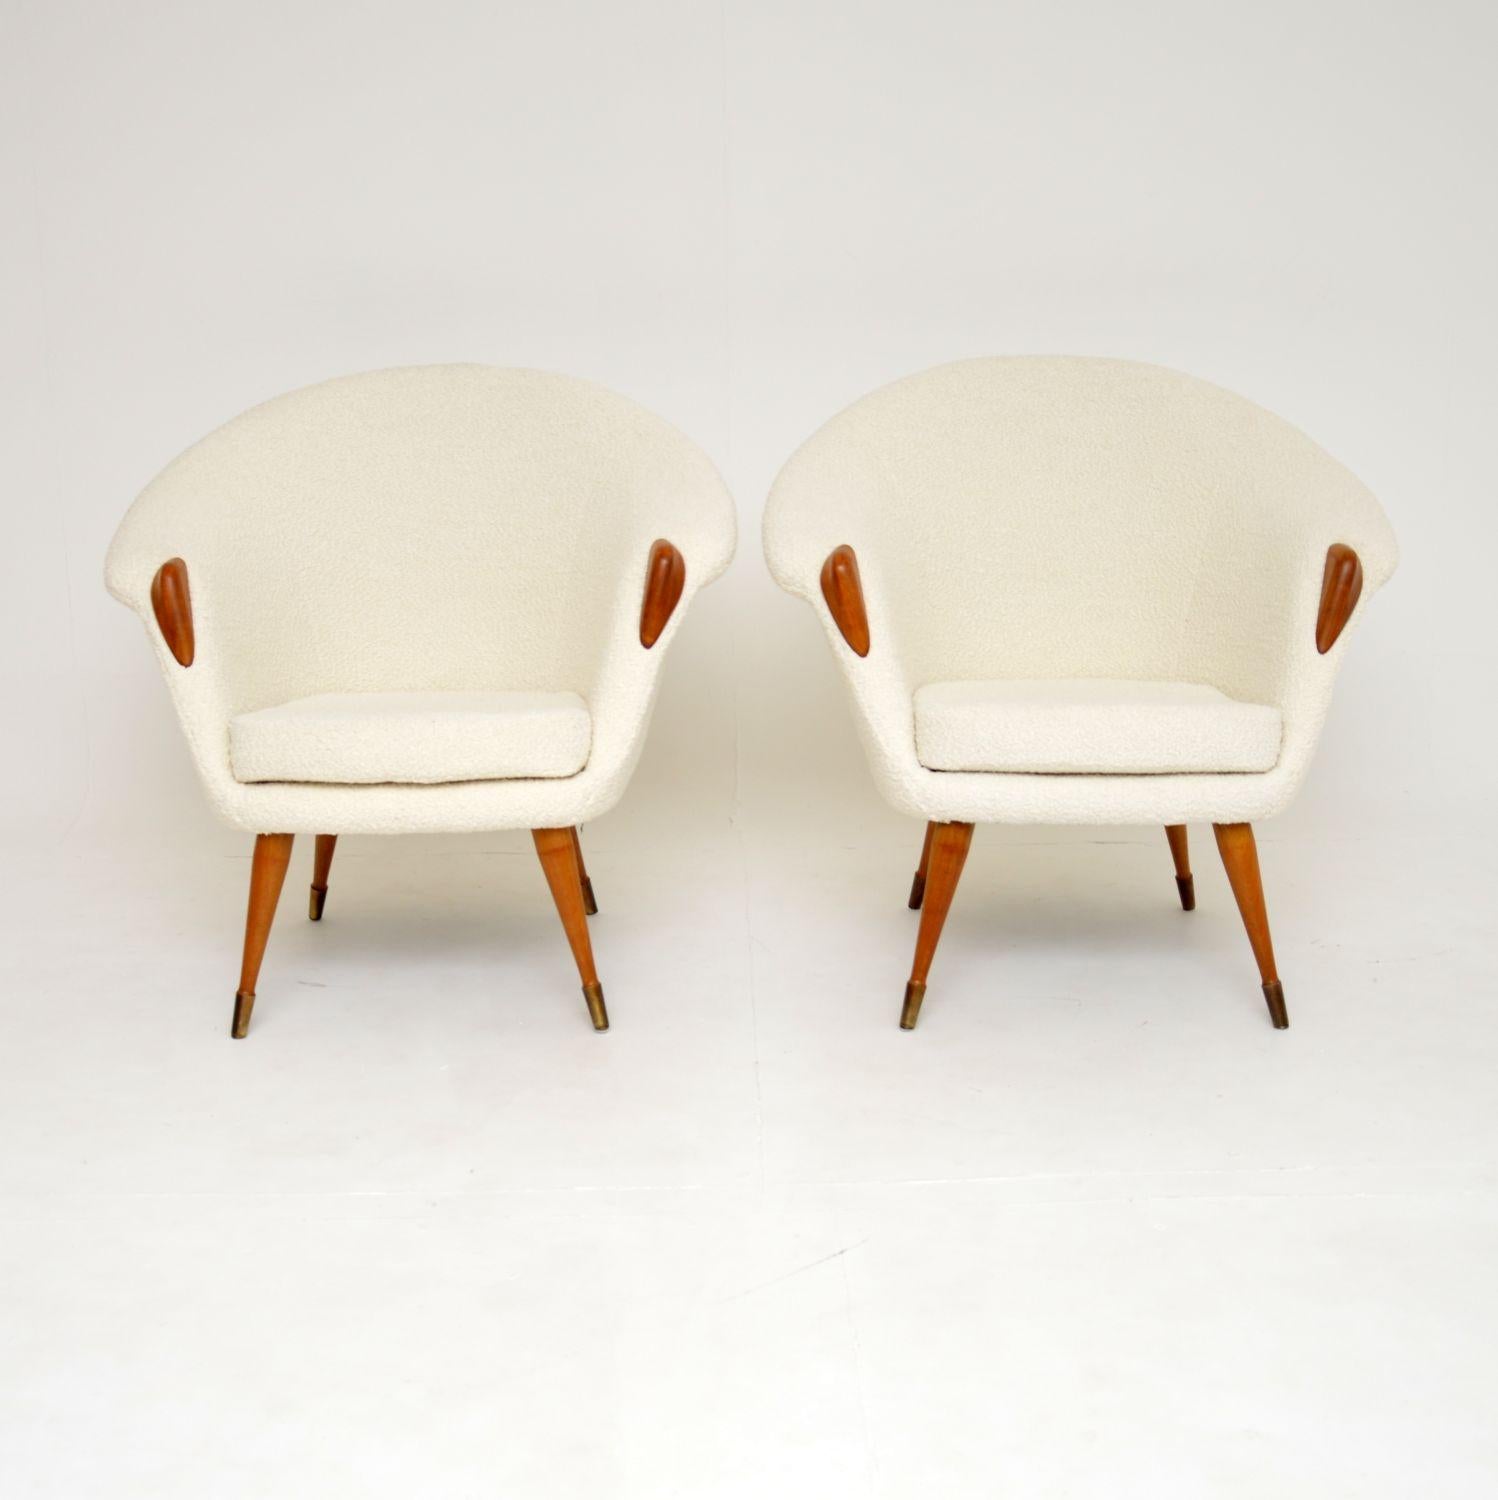 An absolutely stunning pair of vintage armchairs. They were made in England and date from the 1960’s.

The quality is excellent and the design is gorgeous. They have wide curved frames, with teak paws on the arms and teak tapered legs, the legs